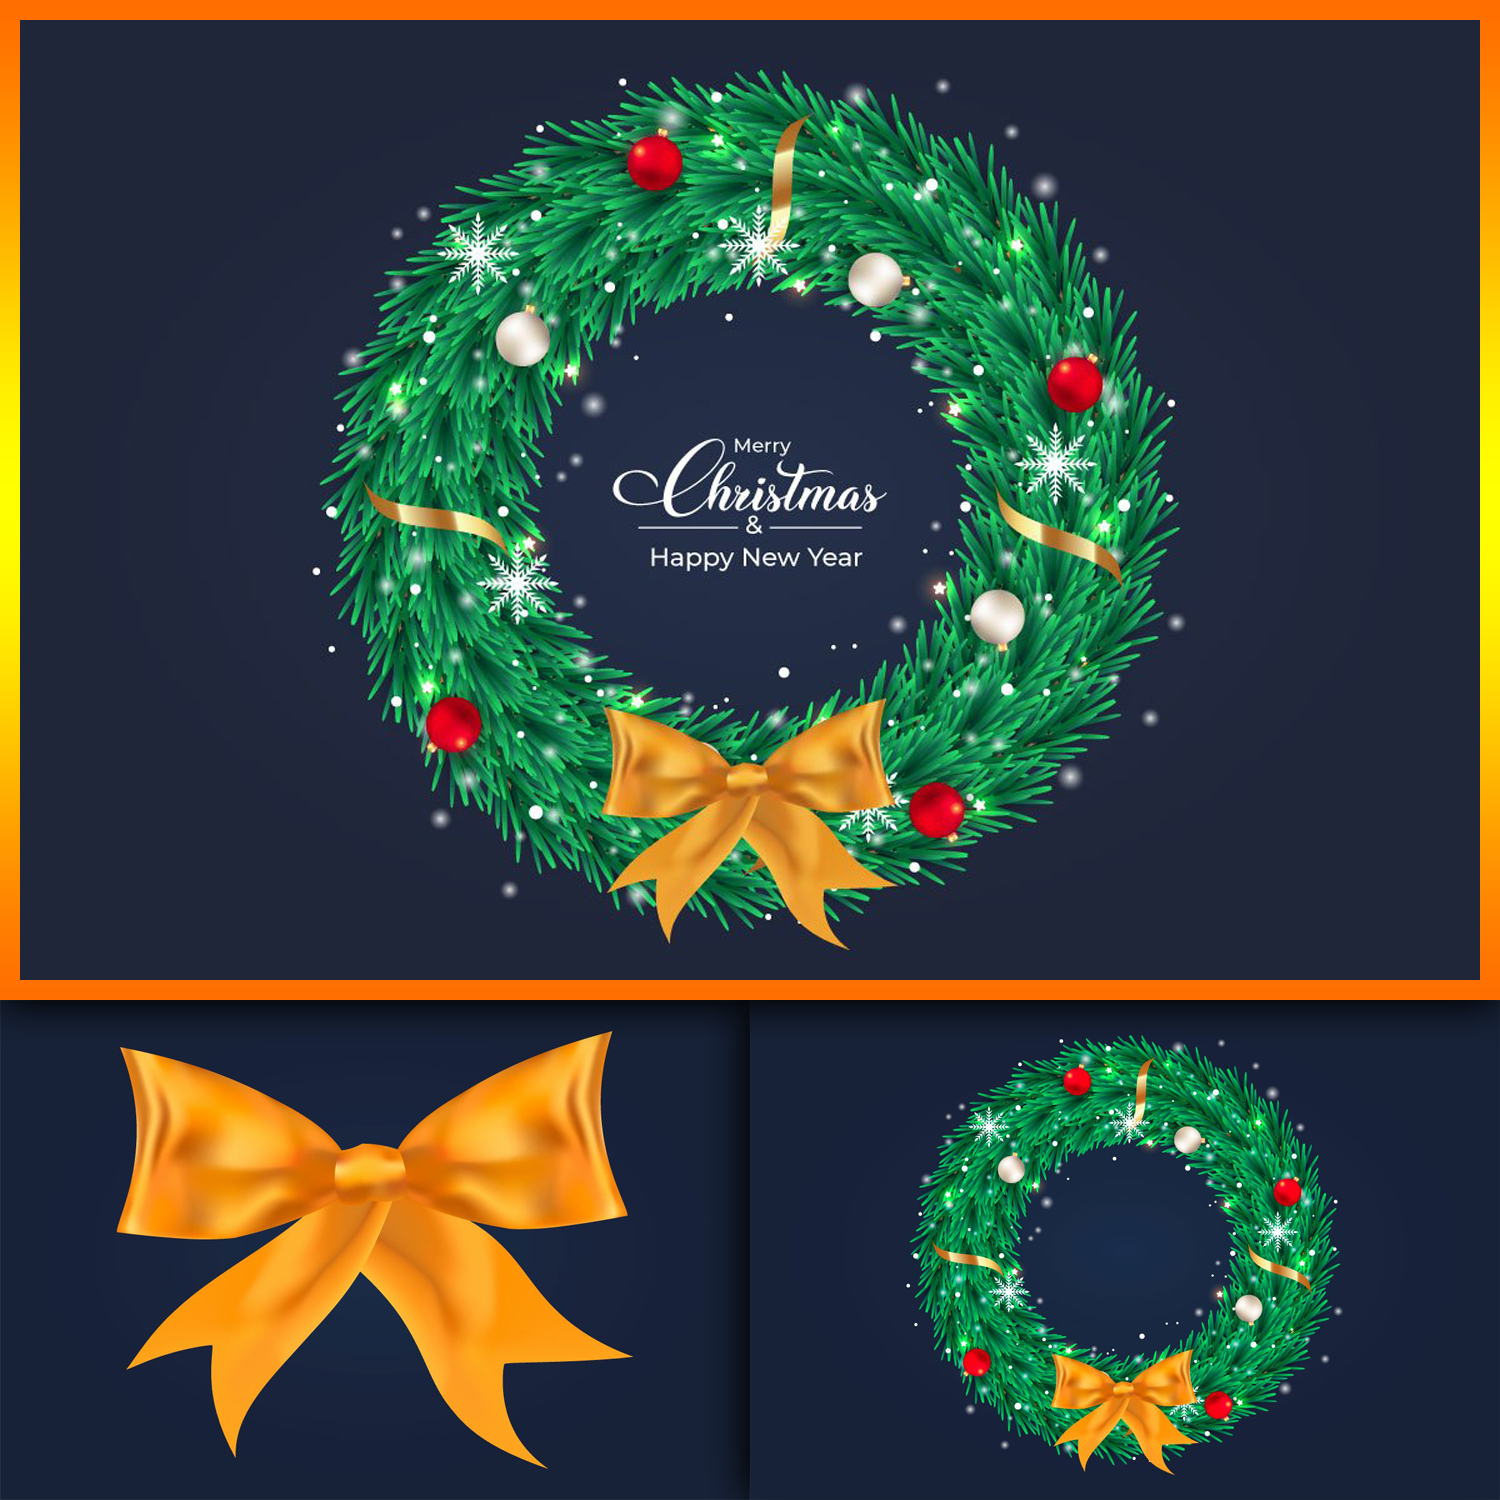 Images with christmas wreath with balls and a ribbon.